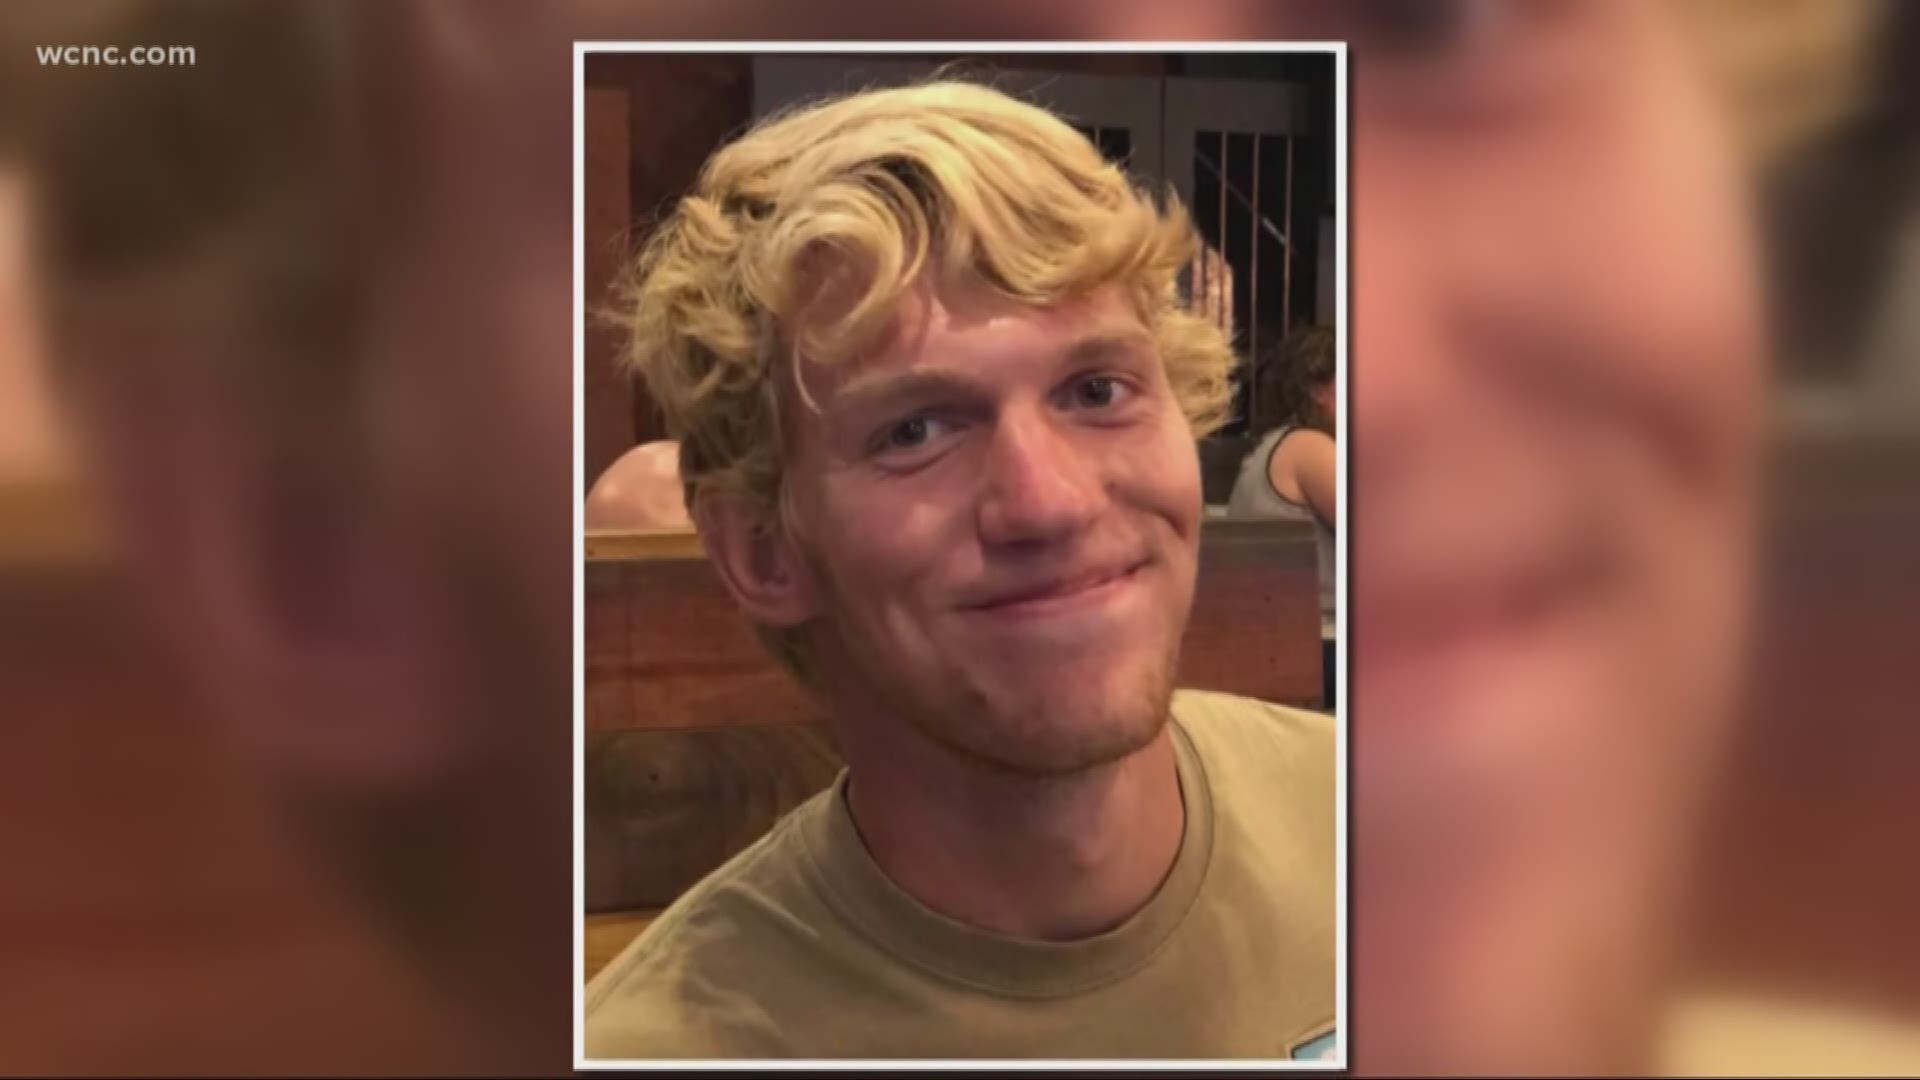 Officers gave Riley Howell's family a standing ovation as they went to accept the award on his behalf. Riley was buried with full military honors.